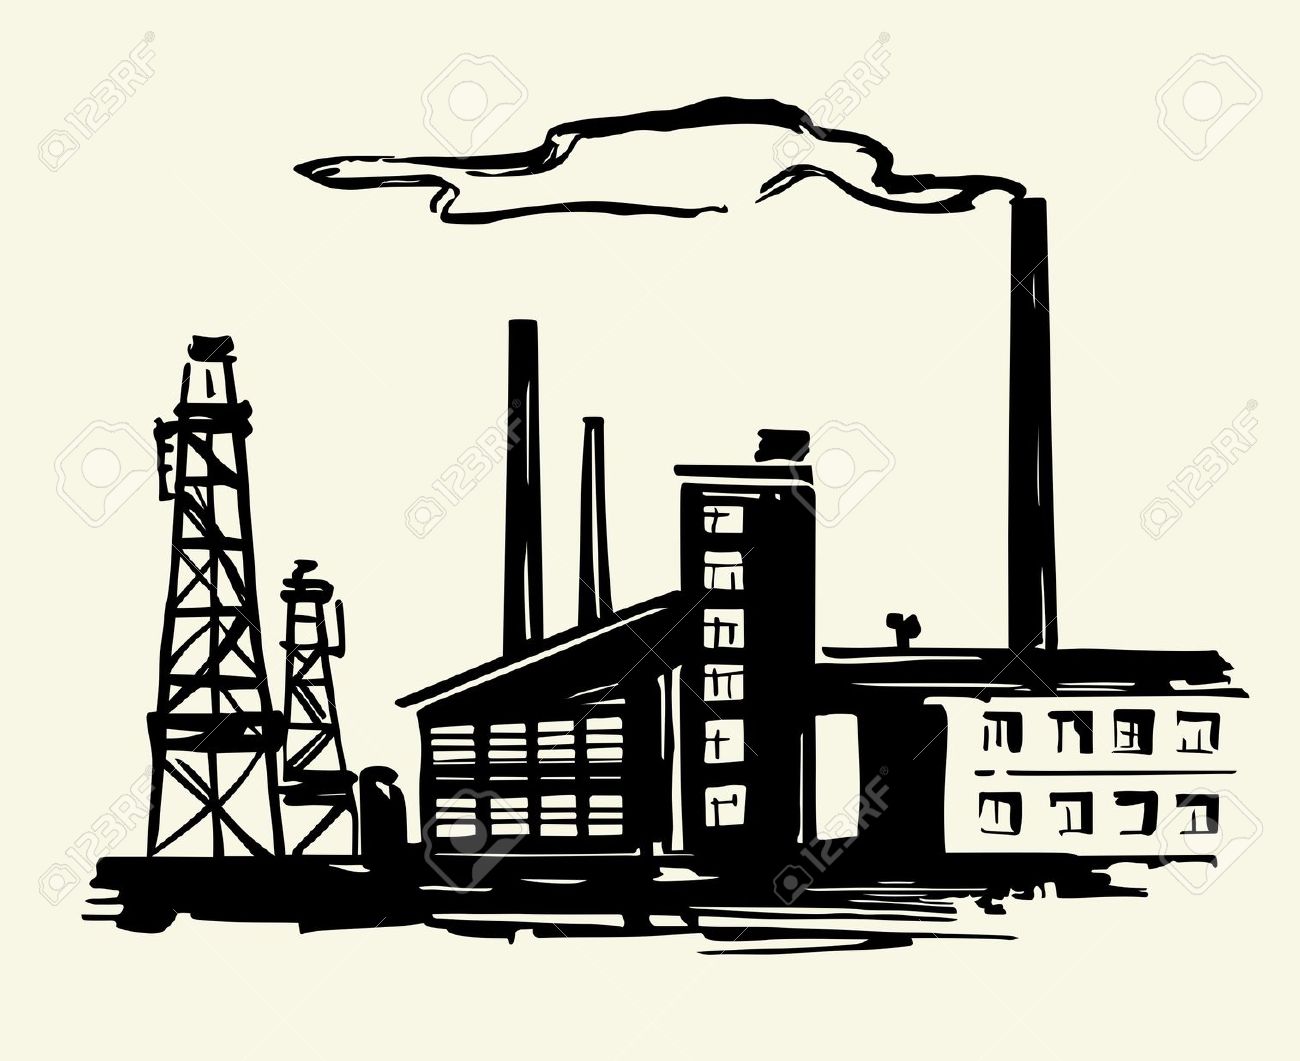 clipart of industry - photo #4